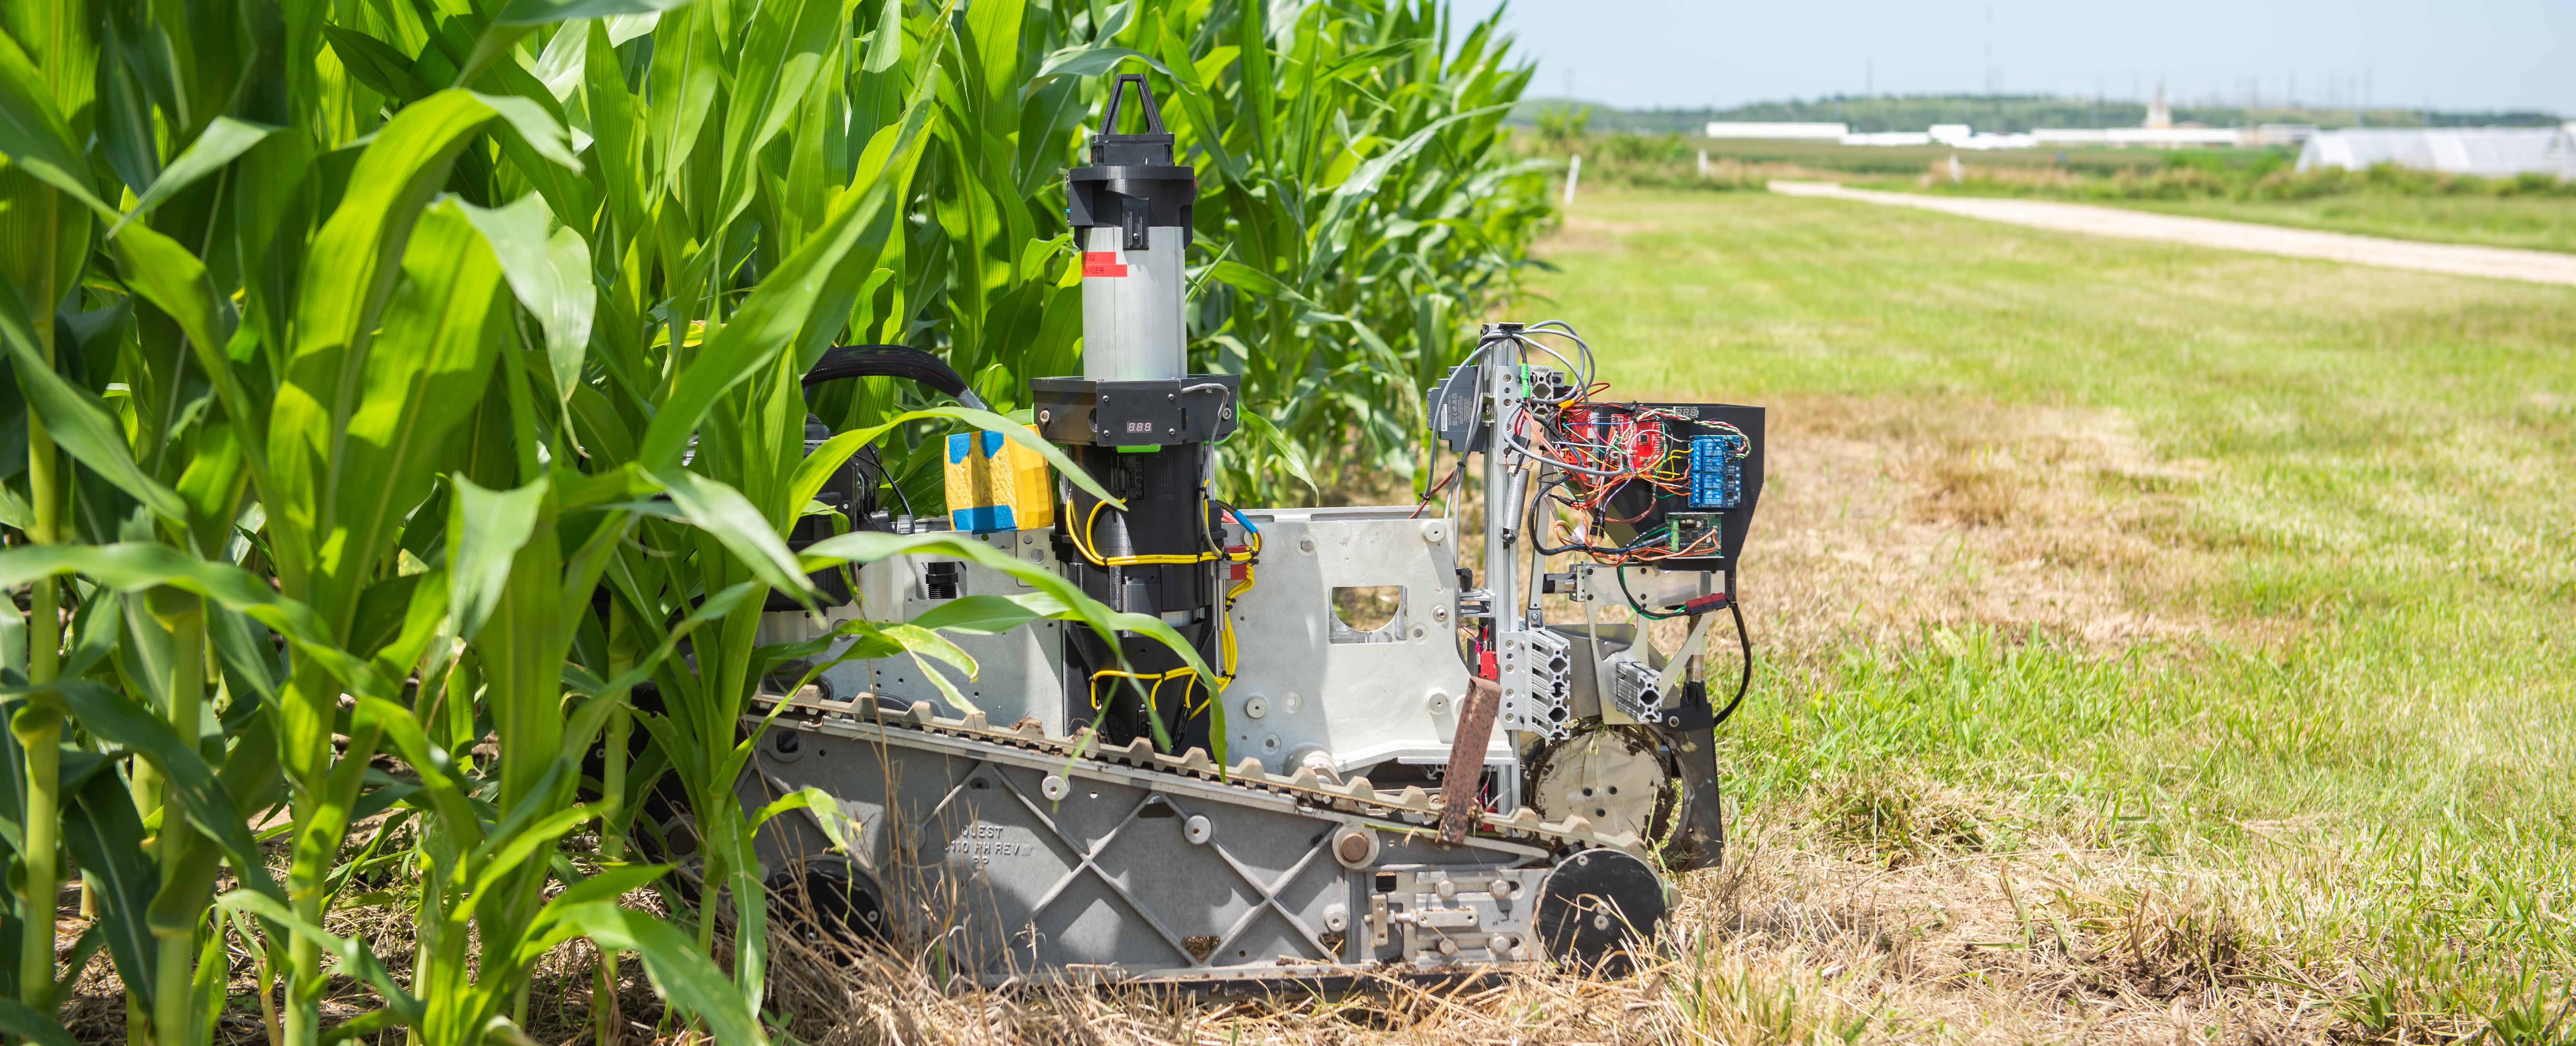 Agriculture robot entering a field